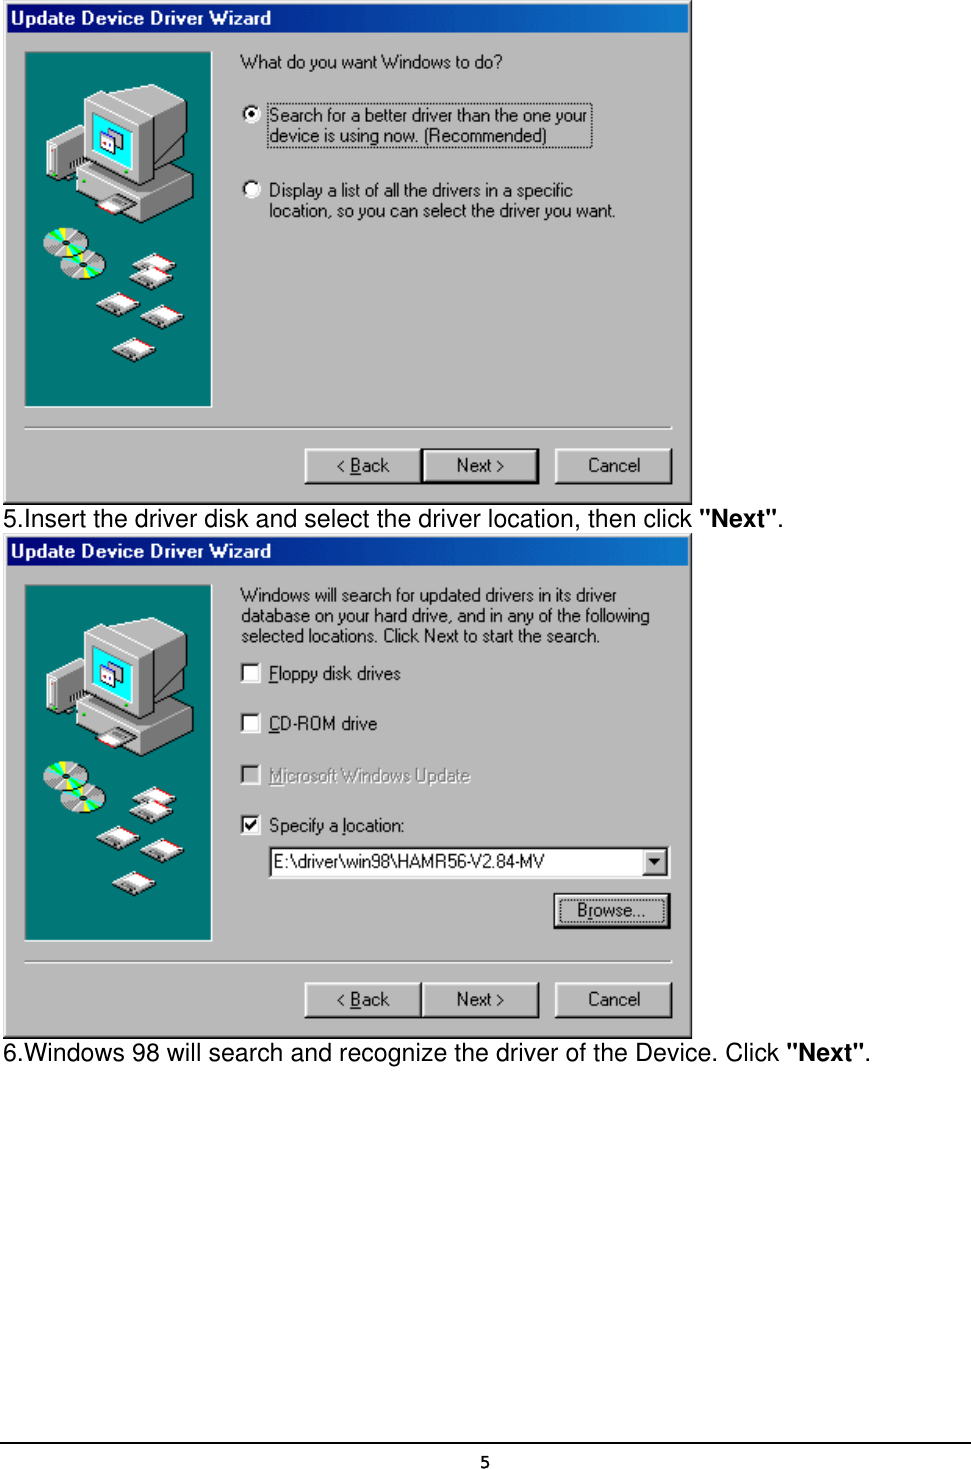   5 5.Insert the driver disk and select the driver location, then click &quot;Next&quot;.    6.Windows 98 will search and recognize the driver of the Device. Click &quot;Next&quot;.   